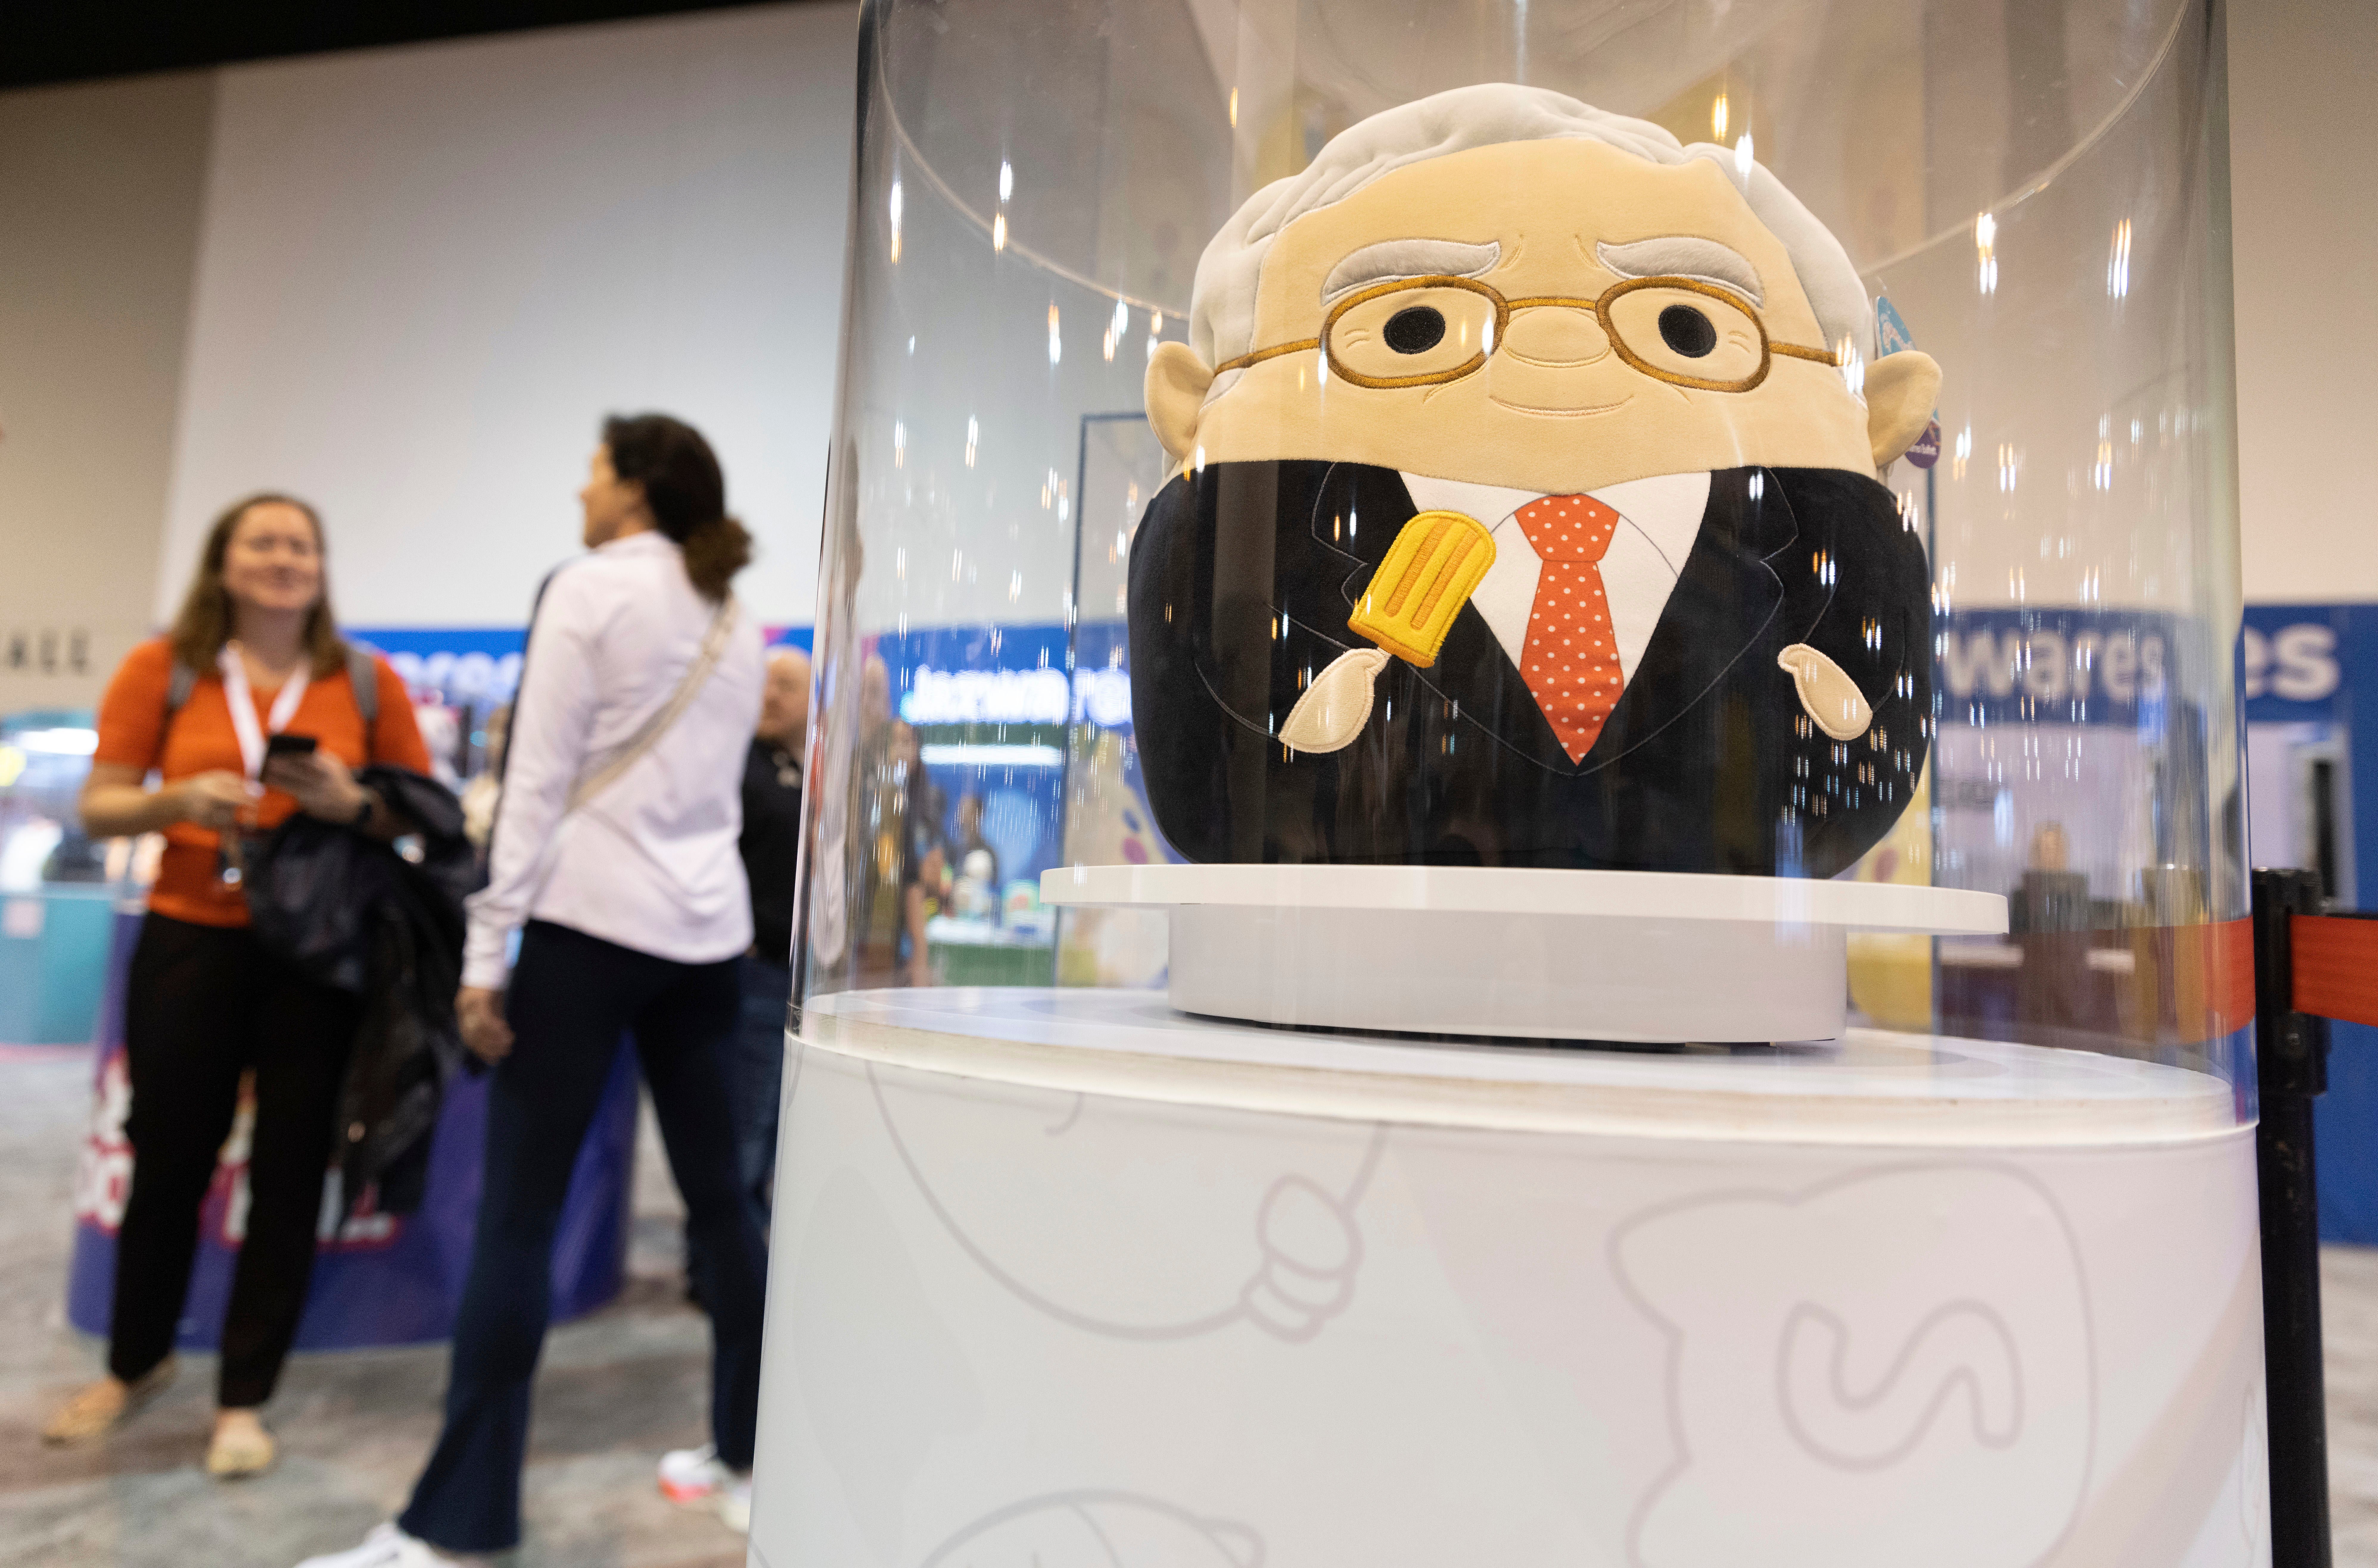 The Squishmallows booth sells toys modeled after Warren Buffett, pictured